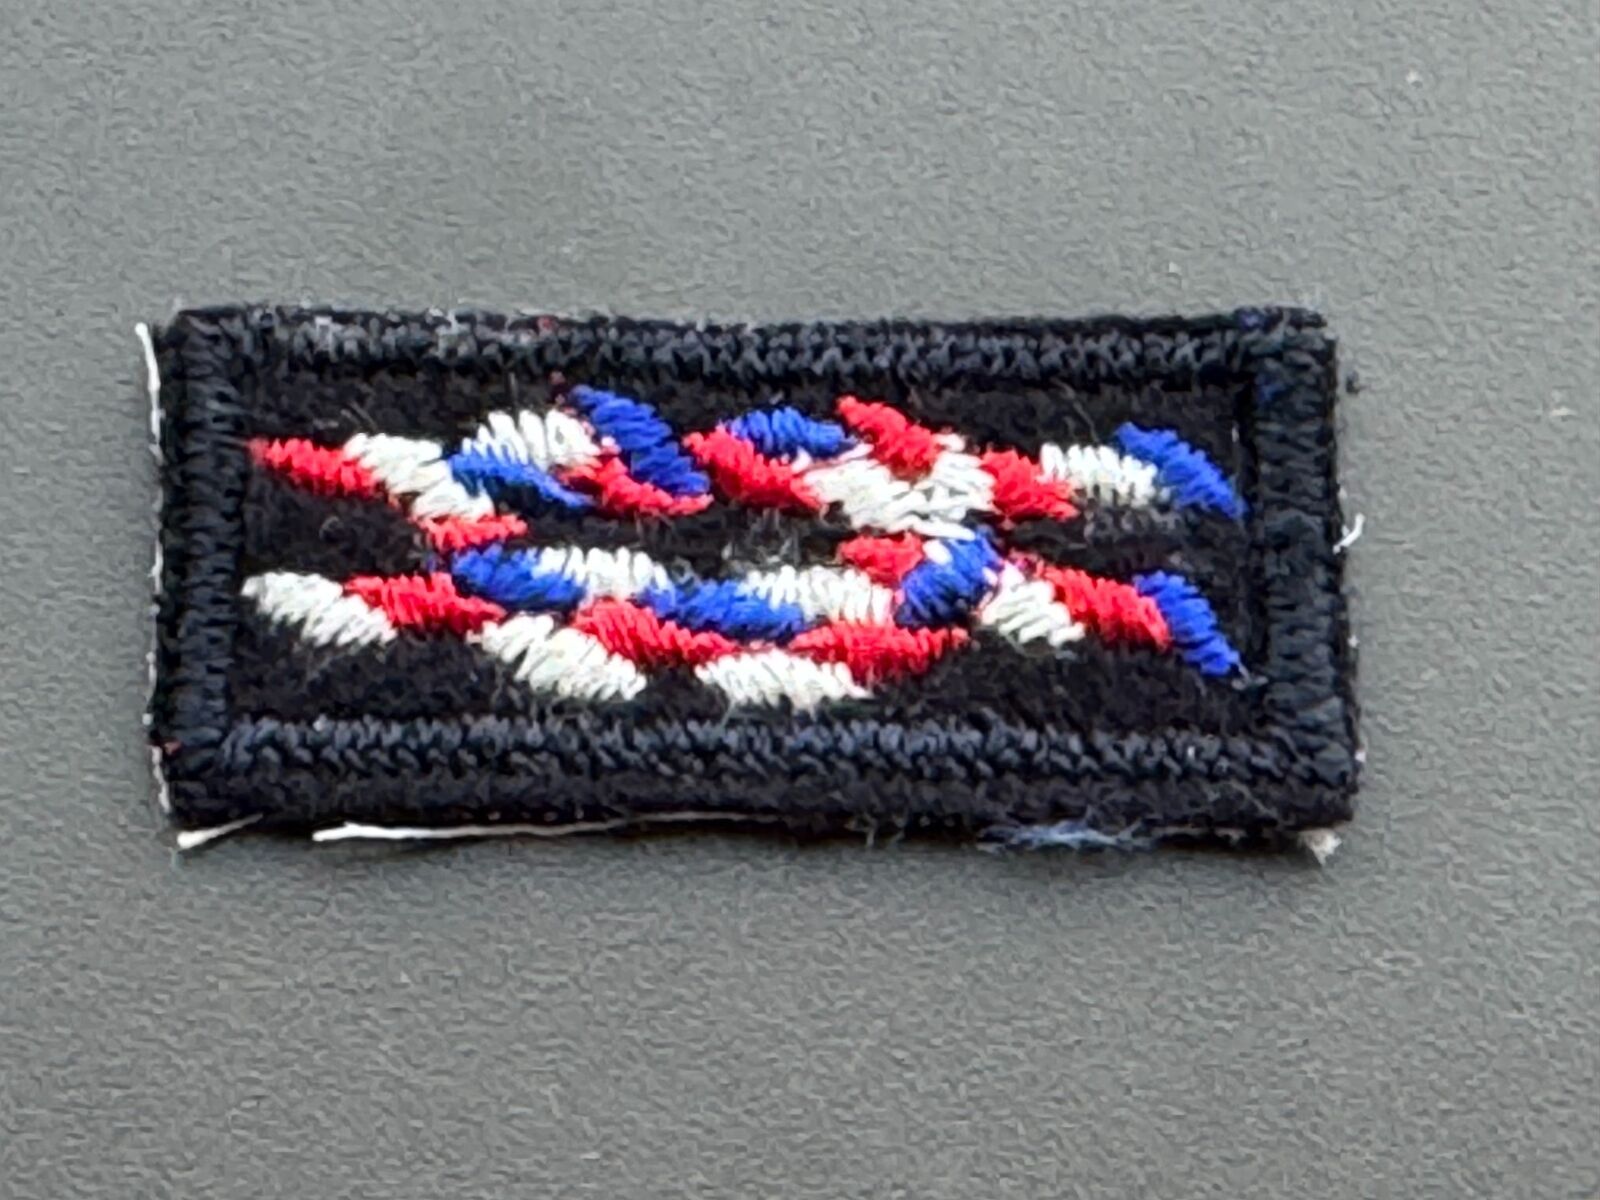 BSA, Vintage Sea Scout/Cub Leader Eagle Scout Square Knot Award Patch, Navy Wool